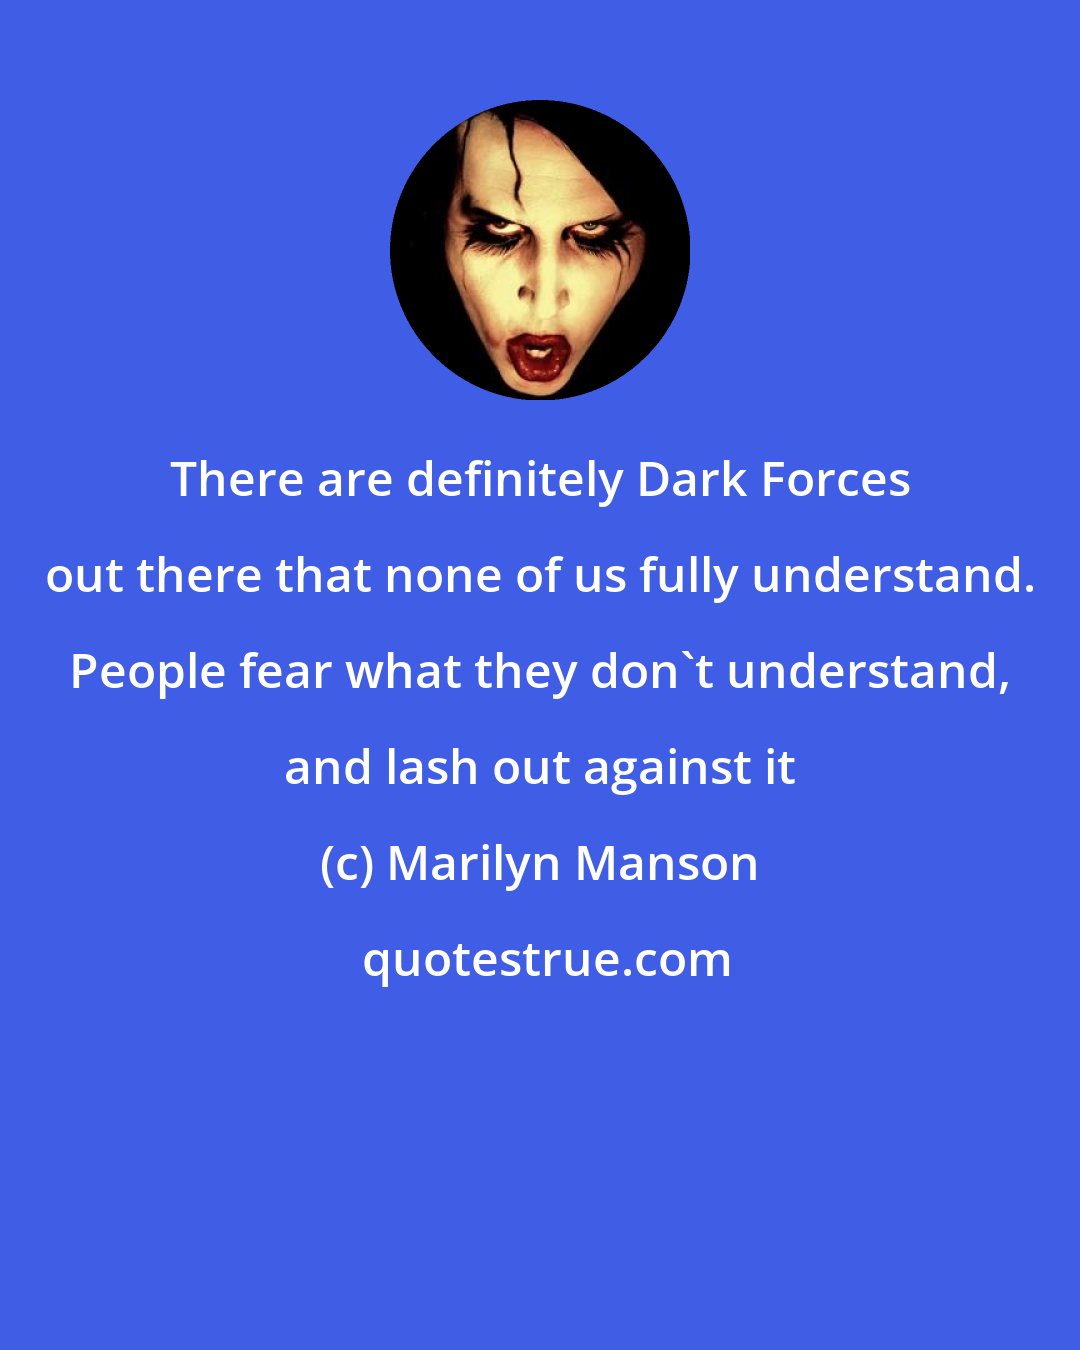 Marilyn Manson: There are definitely Dark Forces out there that none of us fully understand. People fear what they don't understand, and lash out against it